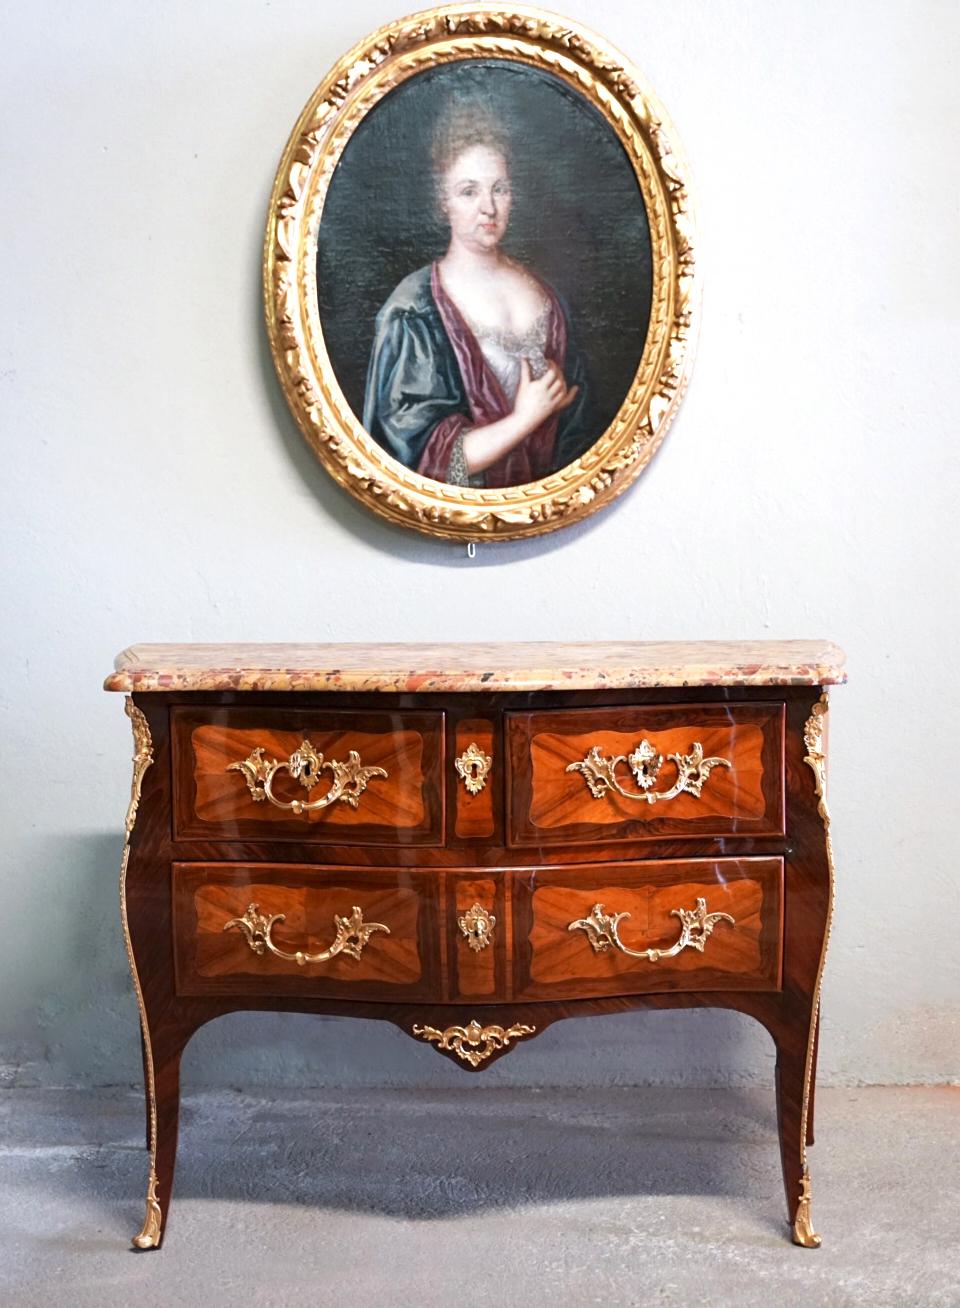 Period: Louis XV. 
Provenance: Paris.
Measurements: 115x57x82h cm. 
Condition: excellent state of preservation.
Description: the Louis XV chest of drawers under examination is a splendid example of refined 18th century Parisian